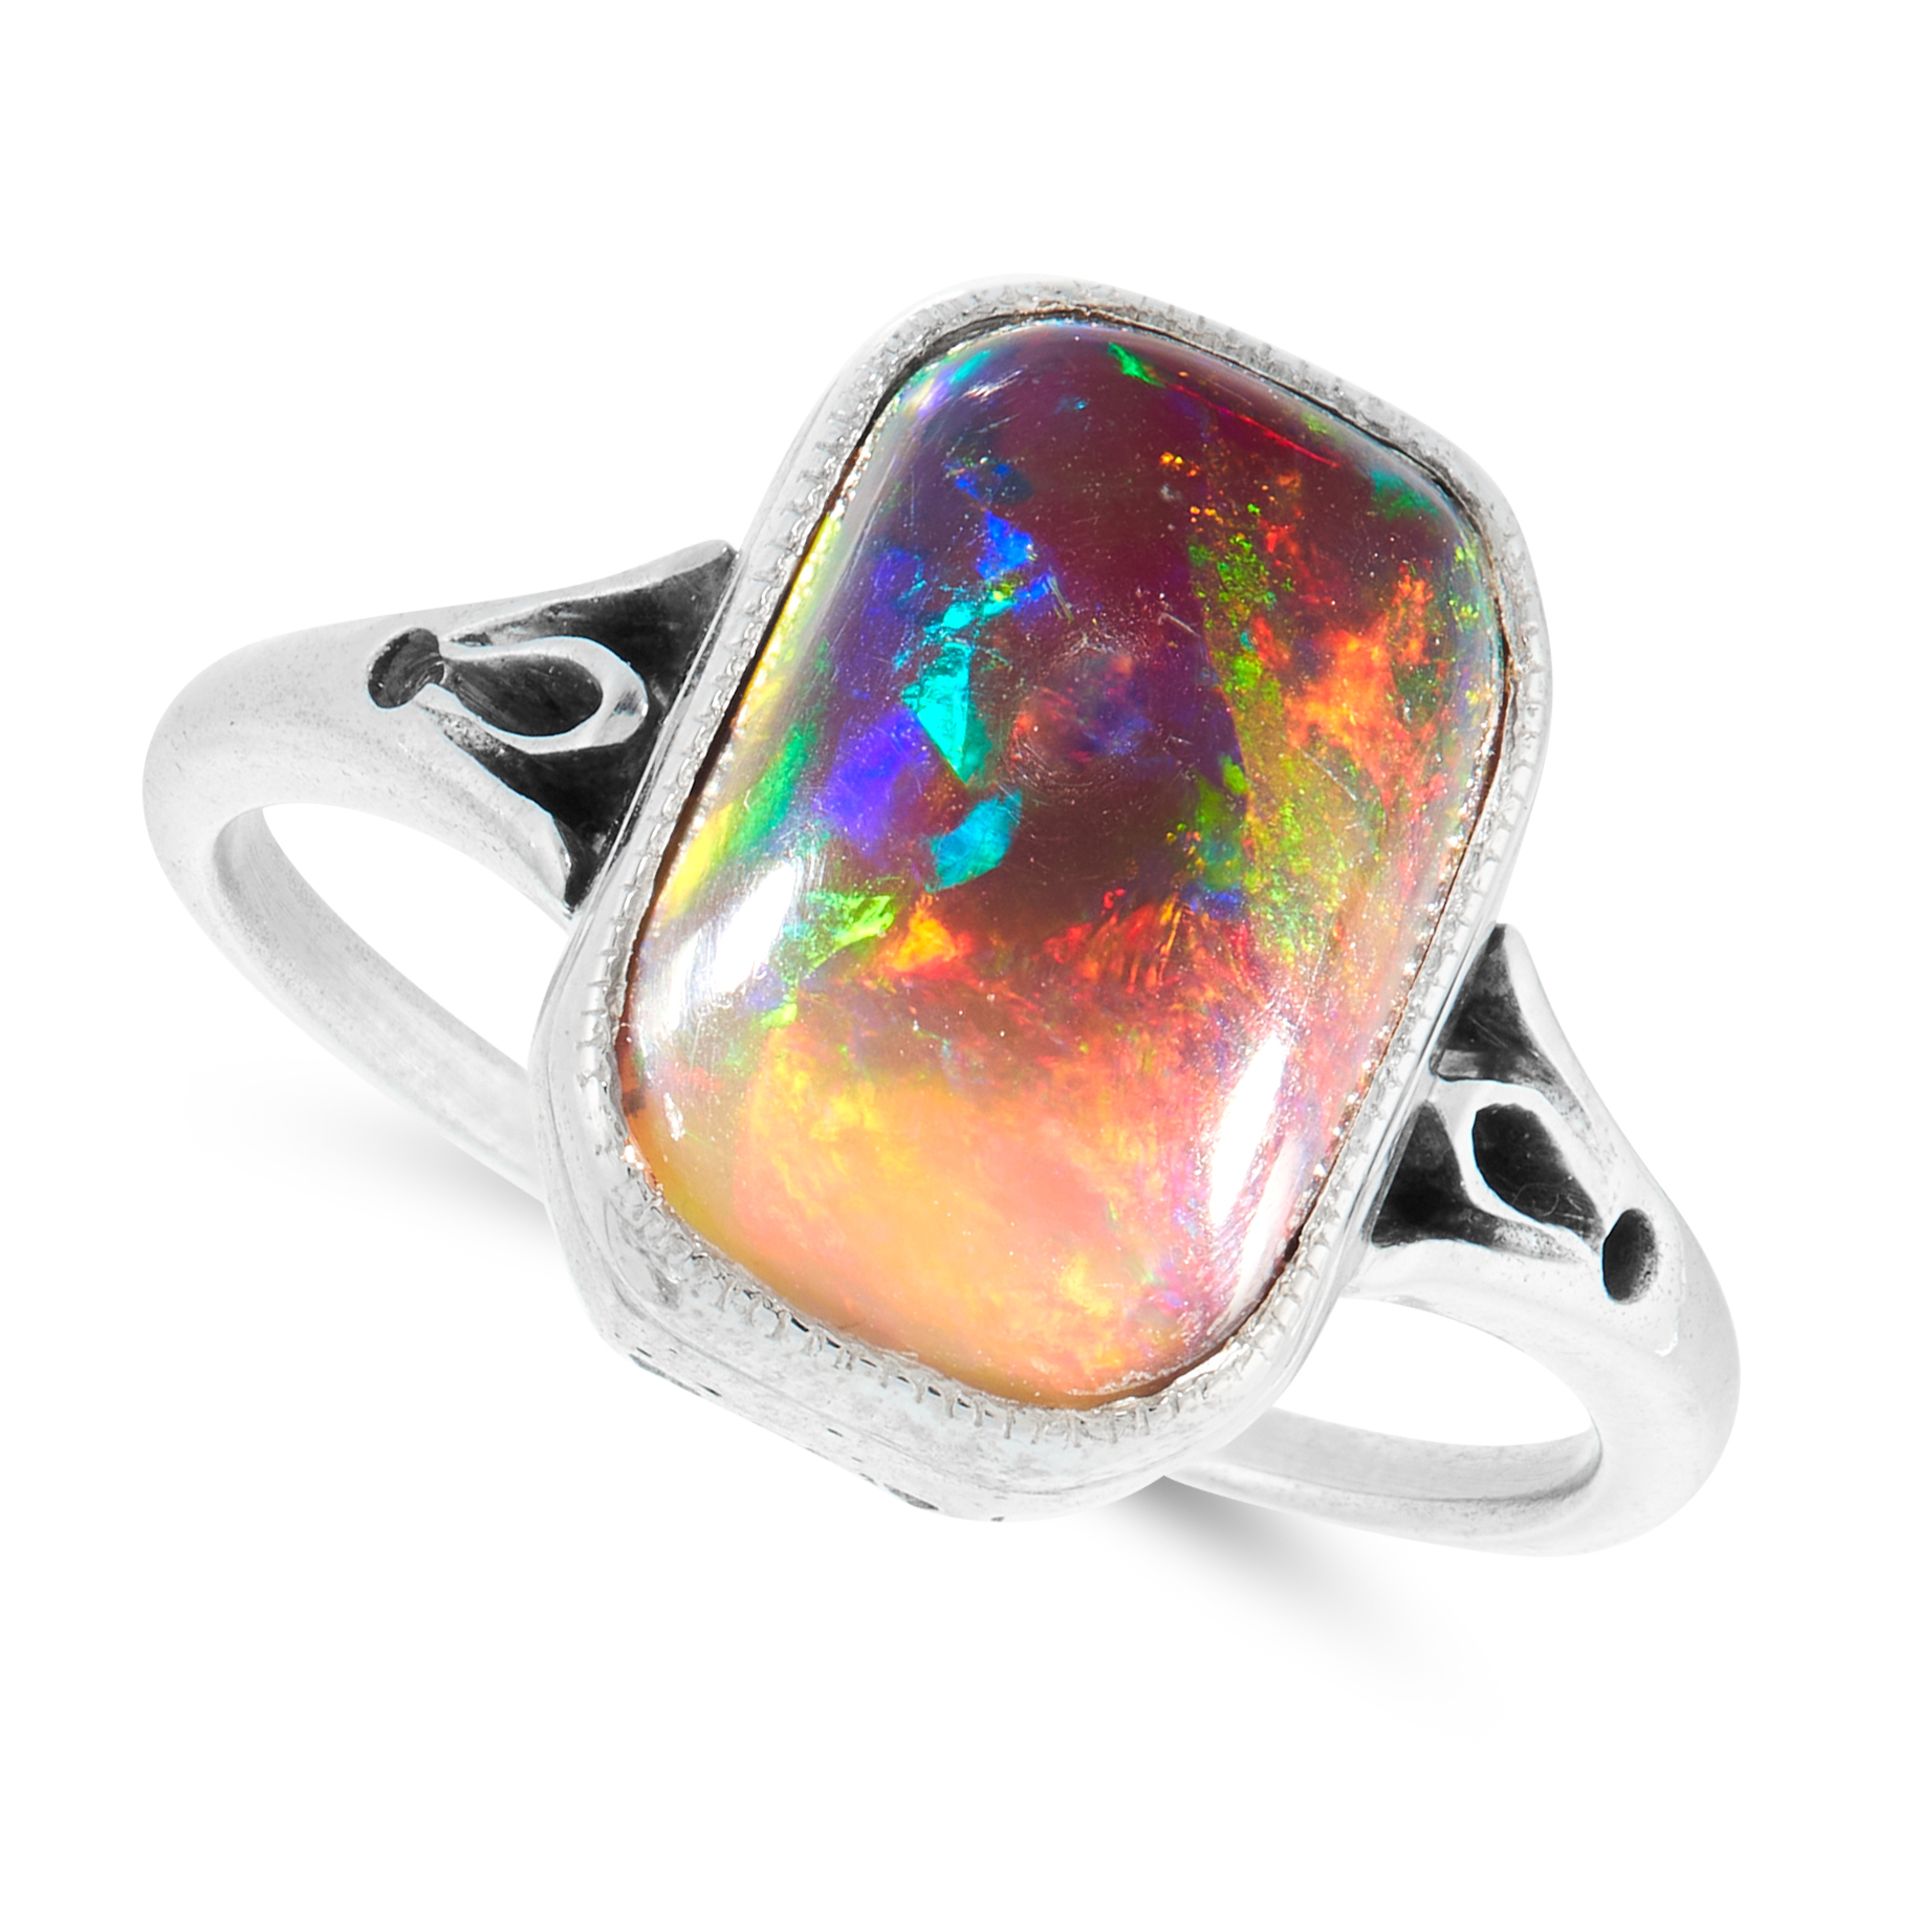 A BLACK OPAL DRESS RING set with a rectangular cabochon black opal of 3.08 carats, unmarked, size